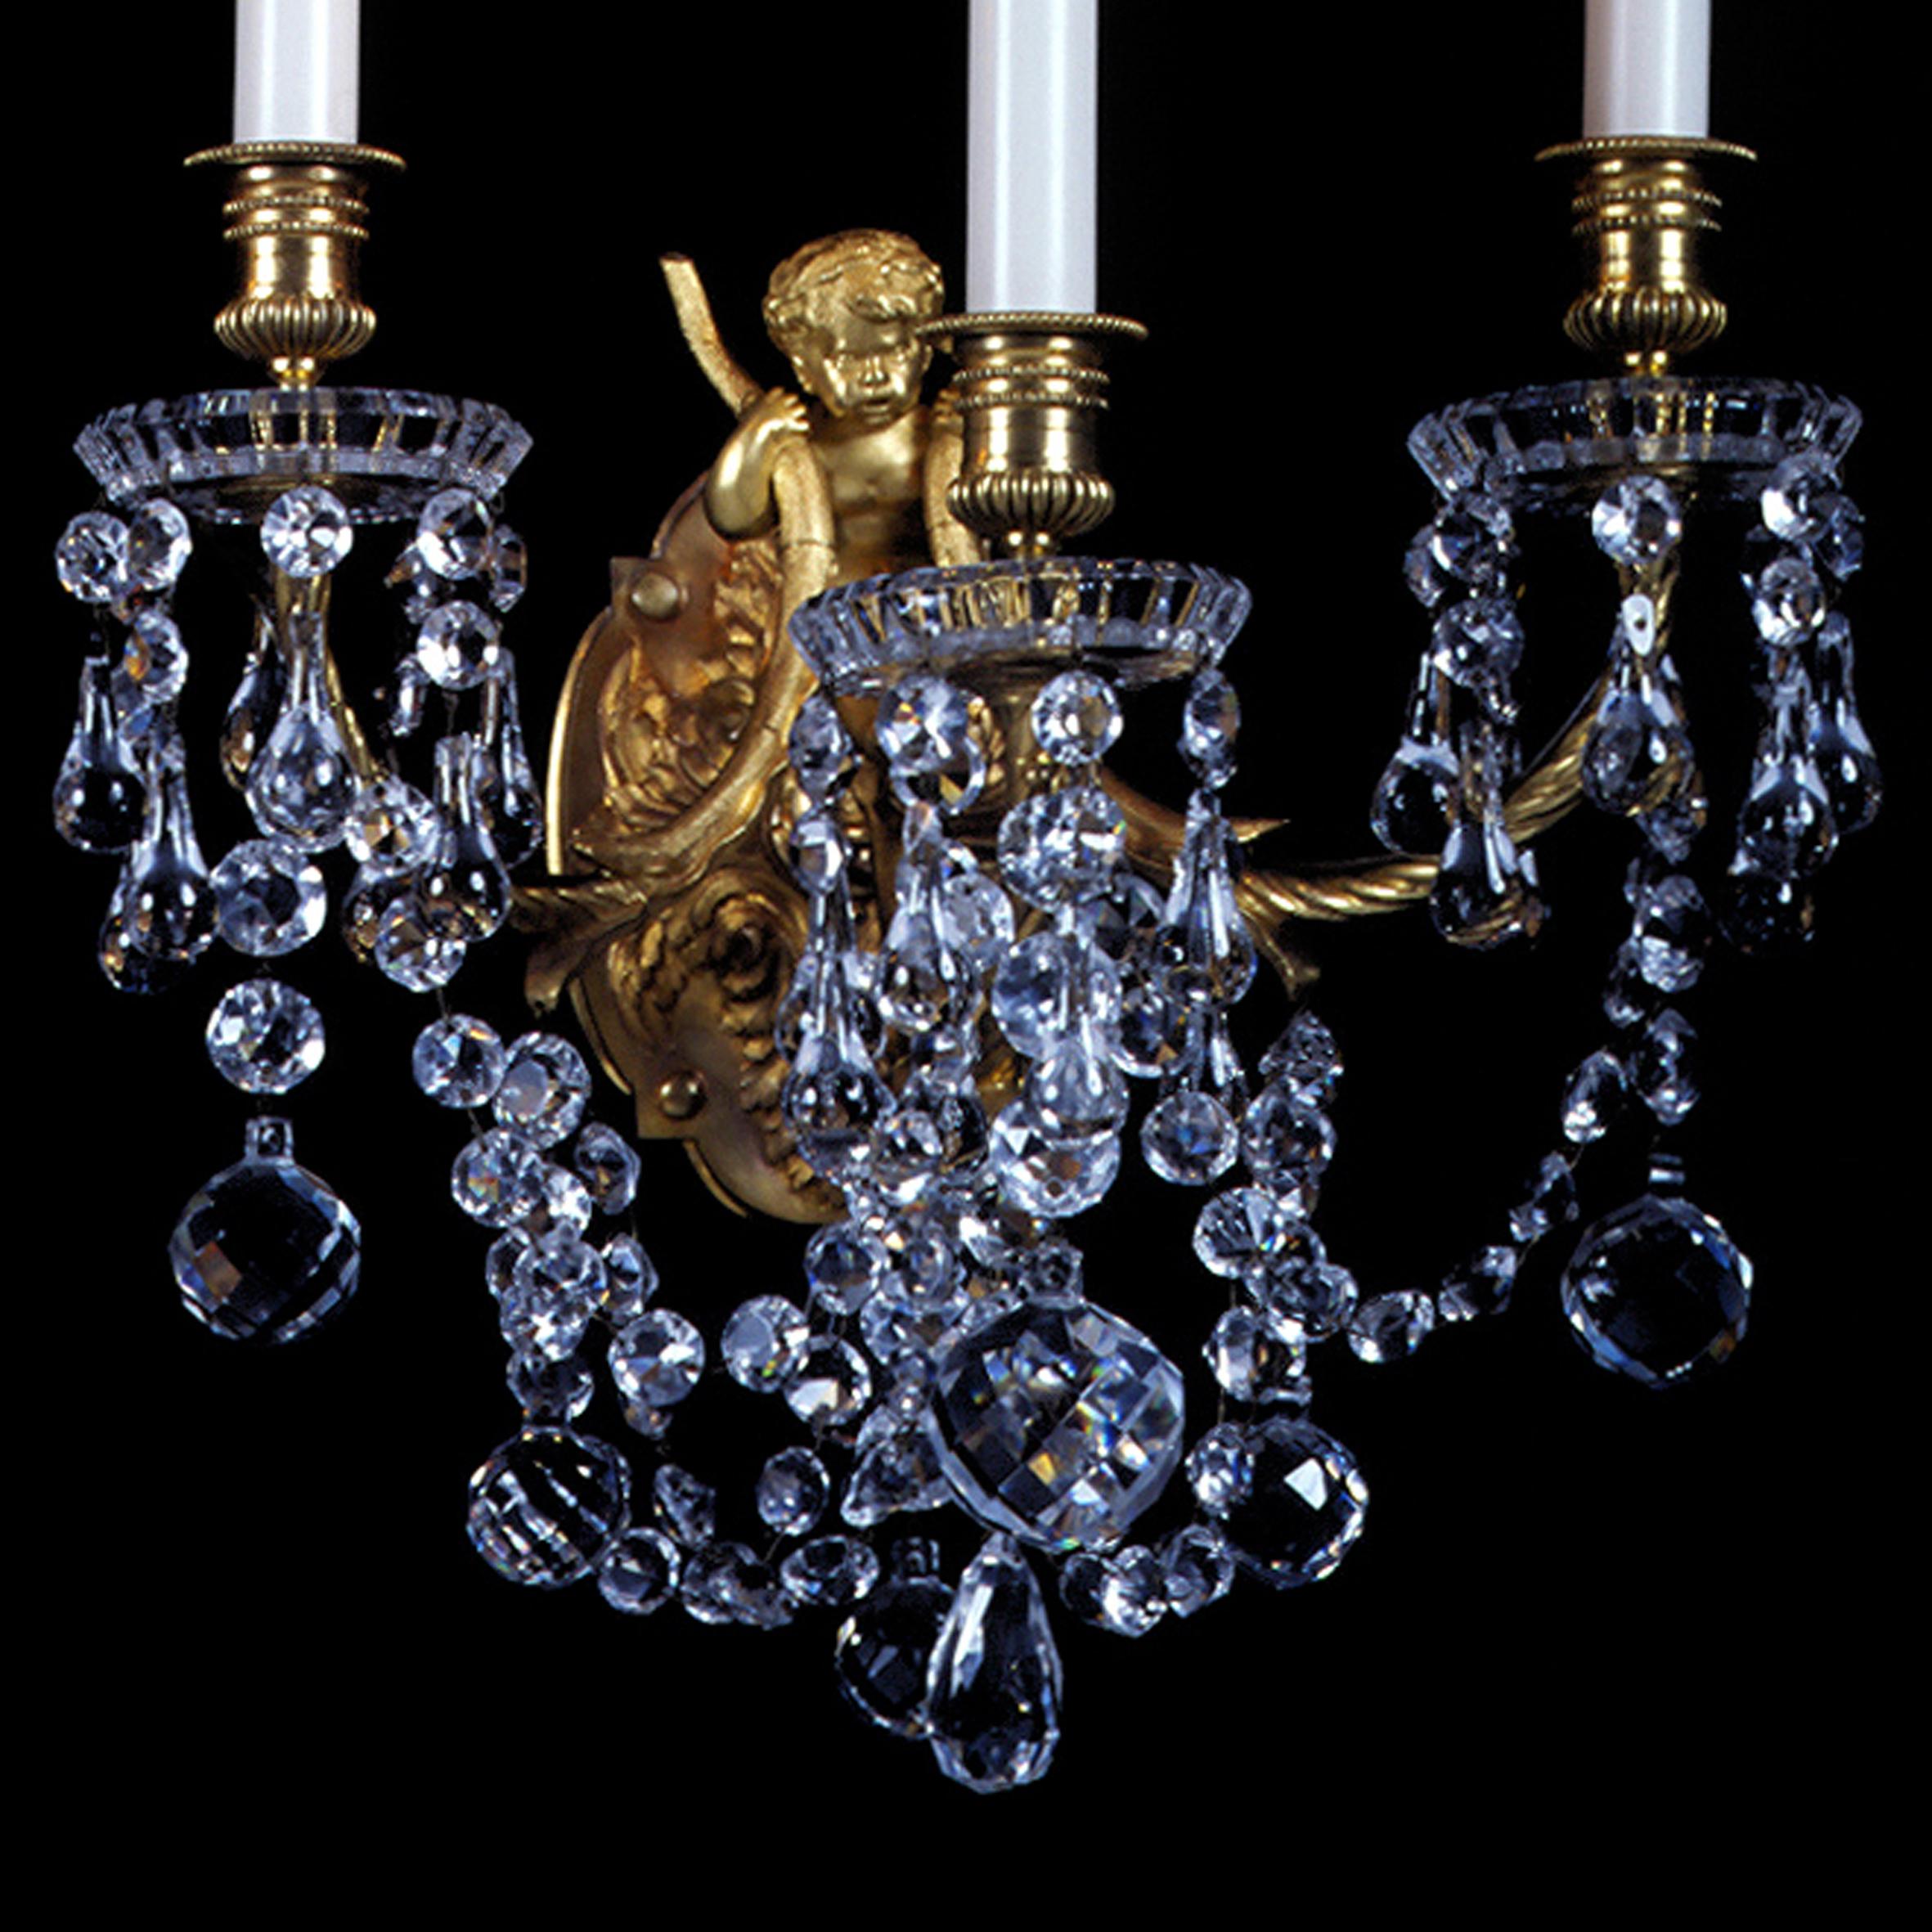 A fine pair of Louis XVI Style Gilt-Bronze and Moulded-Glass Three-Light Cherub Wall Appliqués by La Compagnie des Cristalleries de Baccarat.

French, circa 1890. 

Glass drip pans stamped ‘BACCARAT’.

Each appliqué having an oval acanthus